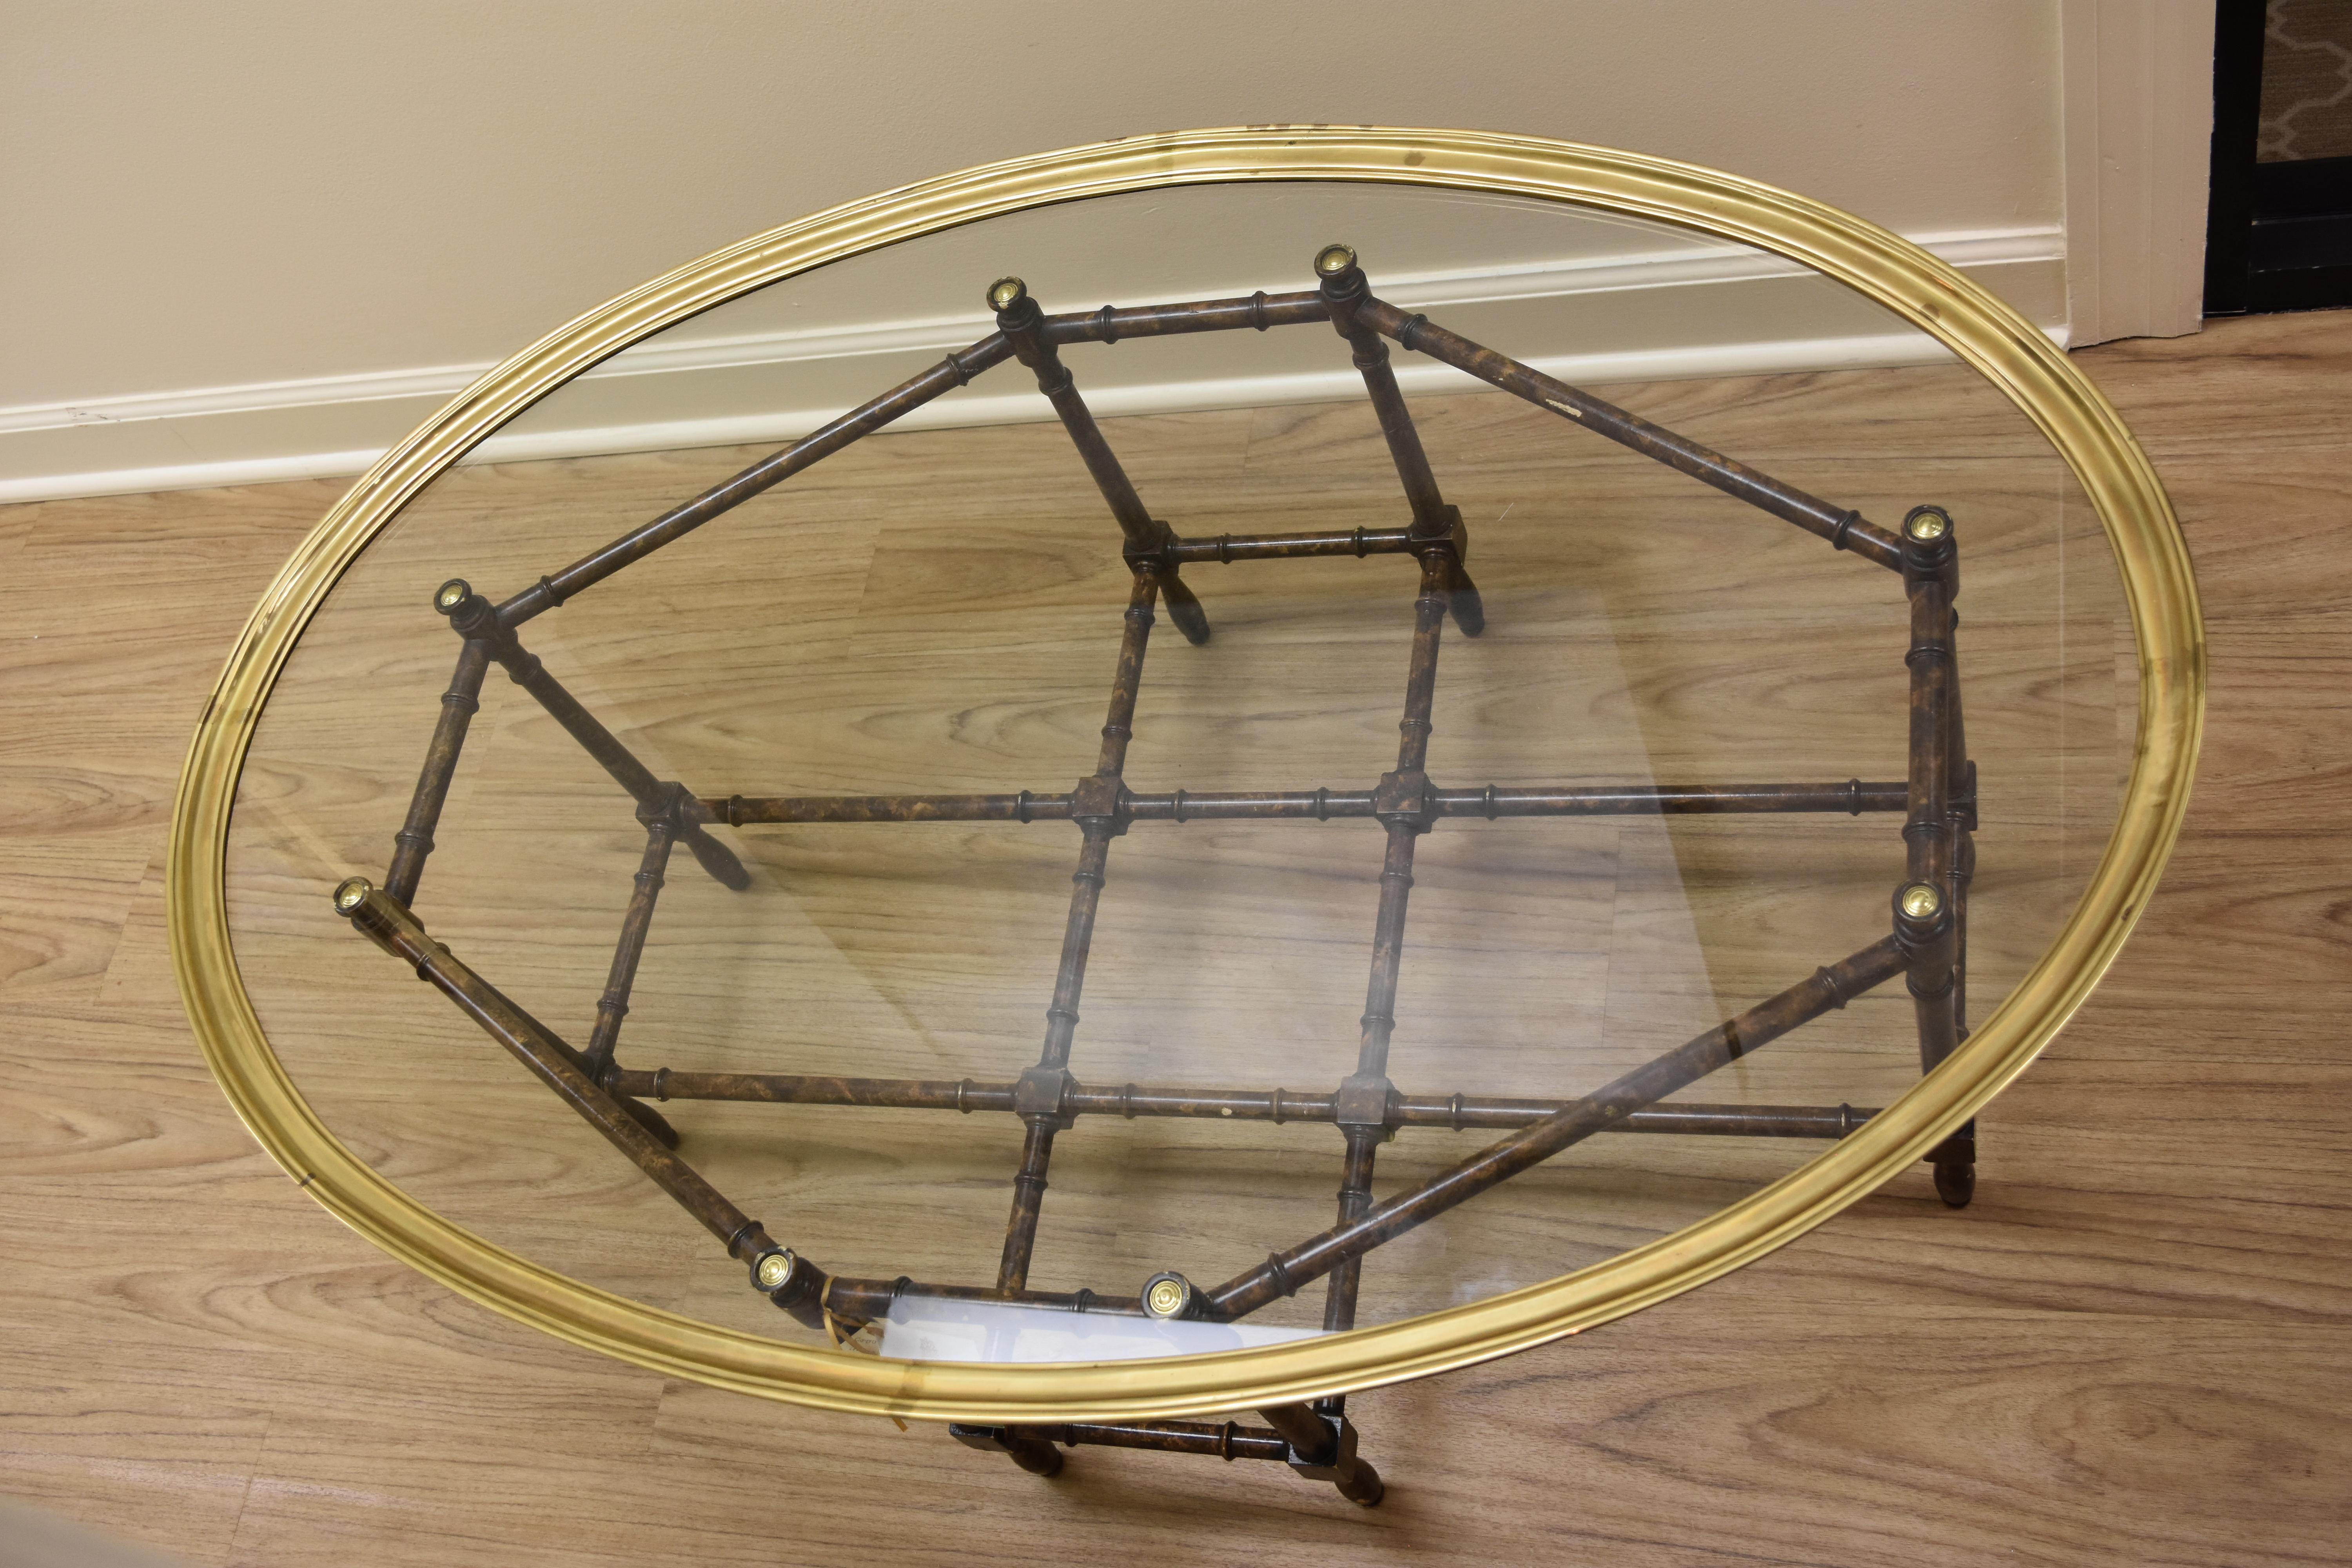 This faux bamboo coffee table is in the Hollywood Regency style and was likely made by Baker. It has a faux bamboo base made out of a resin type material with a tortoise looking finish. The brass and glass top lifts off for easy cleaning and